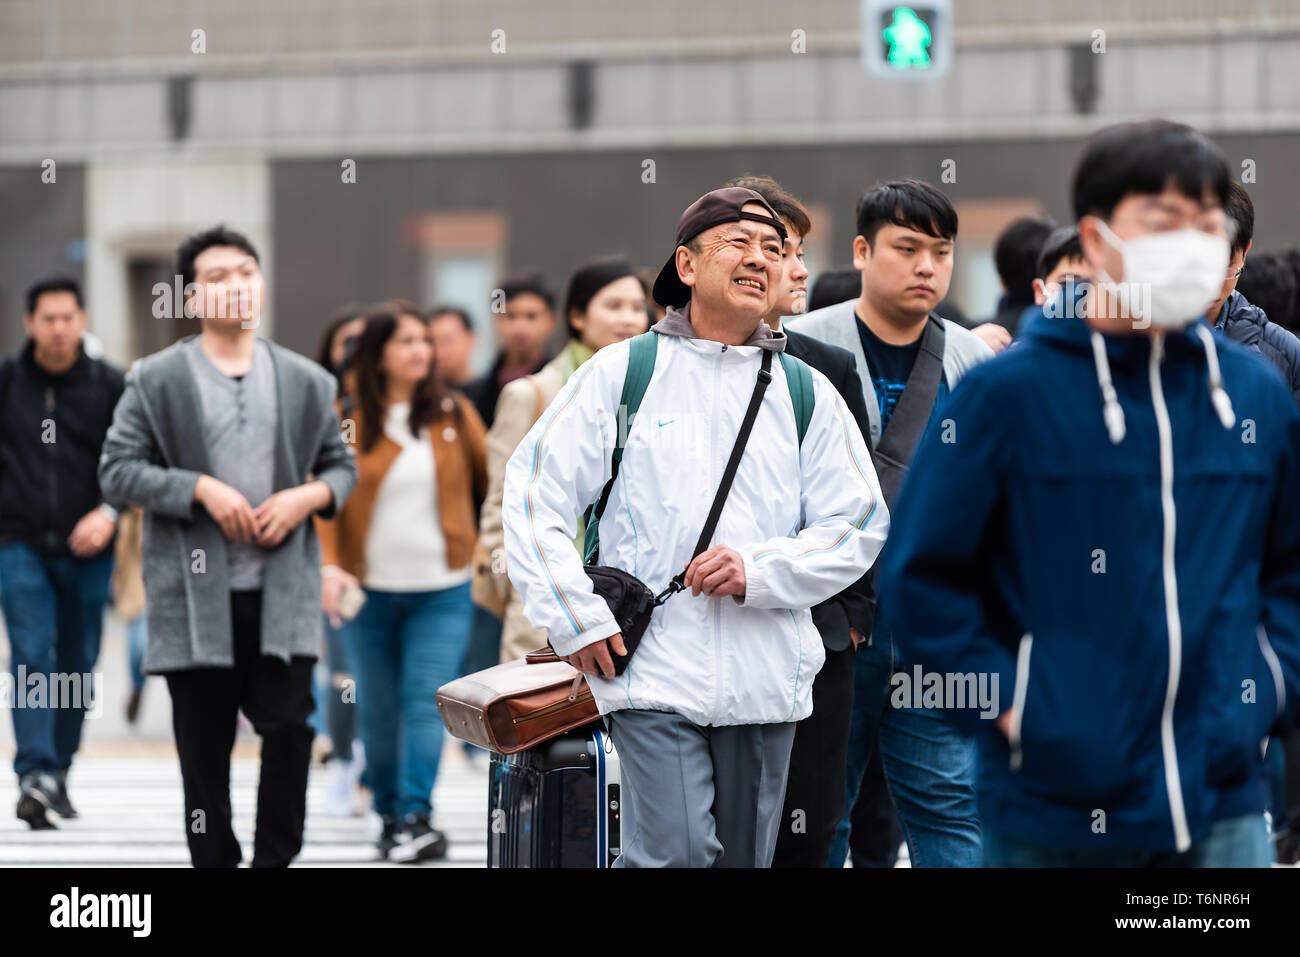 Tokyo, Japan - March 31, 2018: Ginza district with many people local Japanese walking crossing street with man in mask Stock Photo